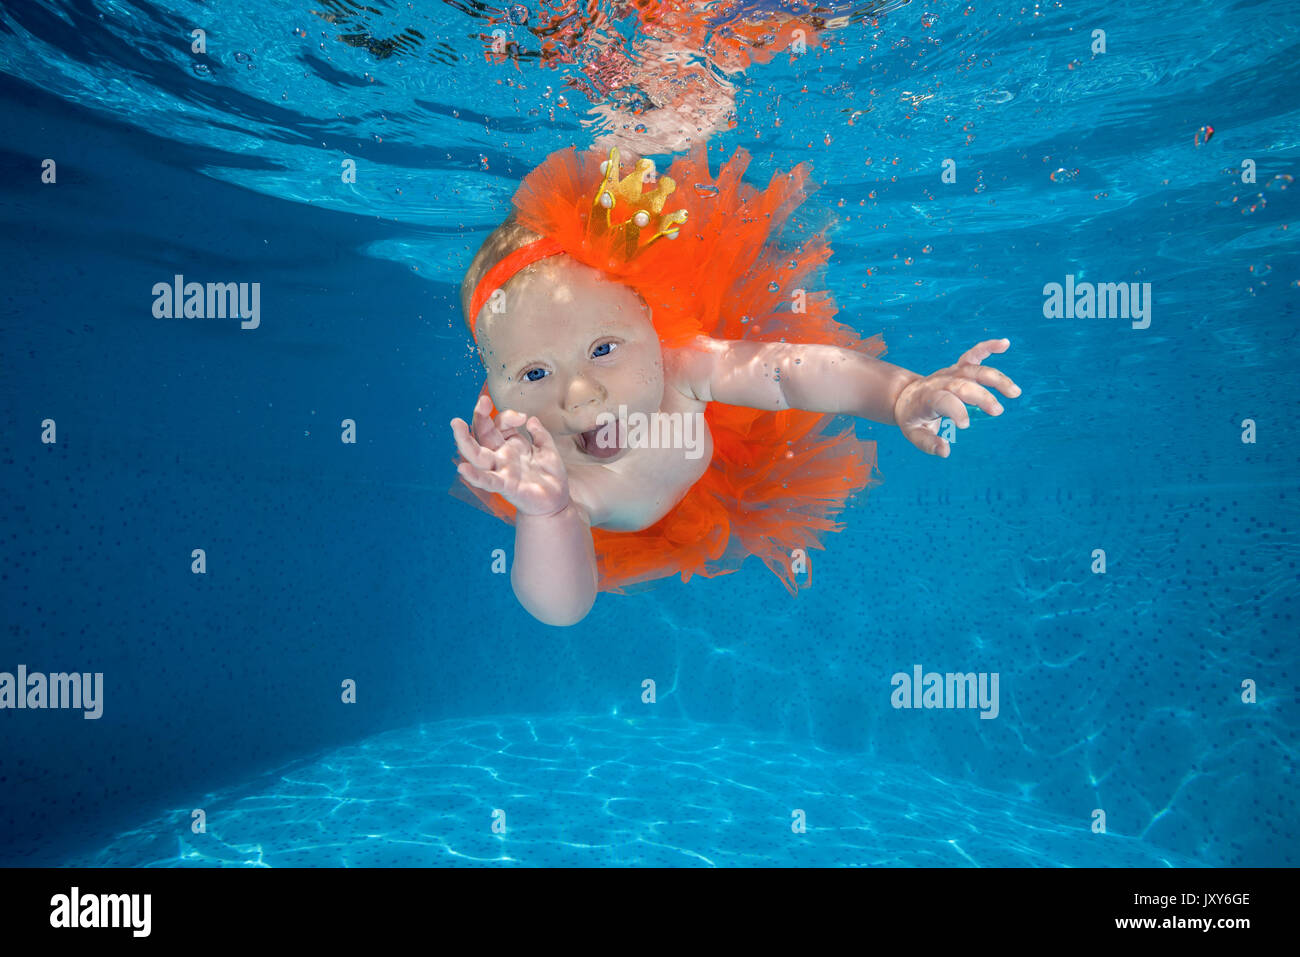 A little girl dressed as a princess under water in a pool Stock Photo